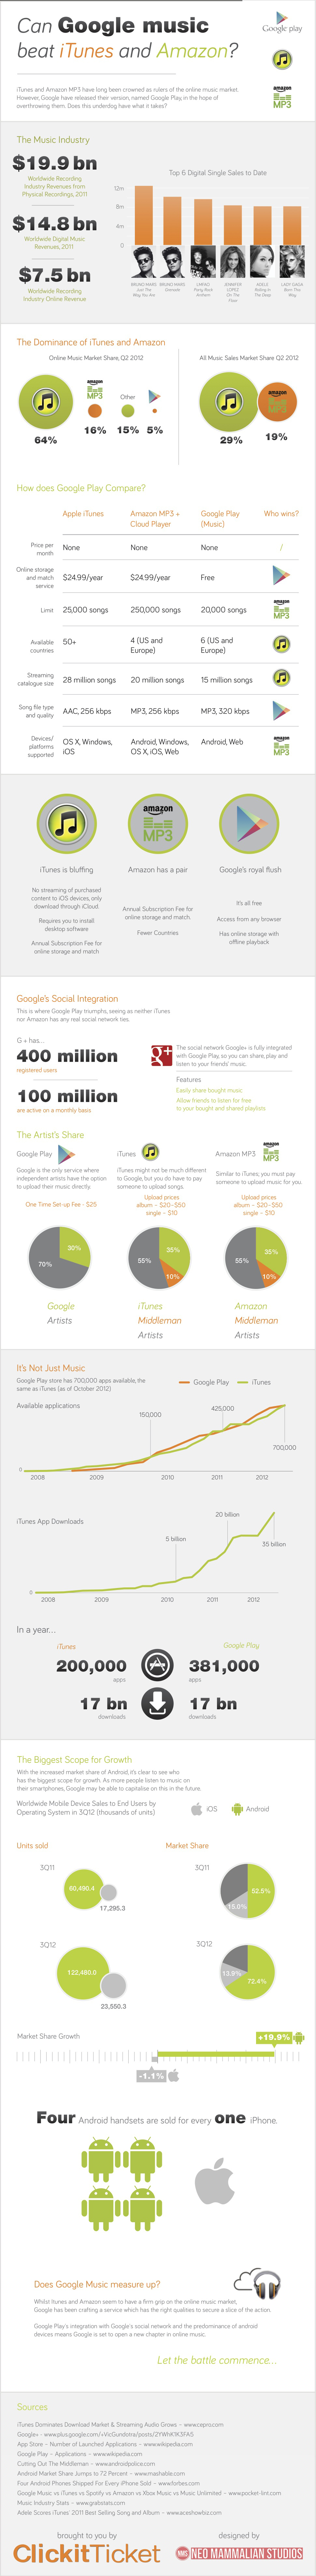 Can Google Music beat itunes and Amazon? [Infographic]